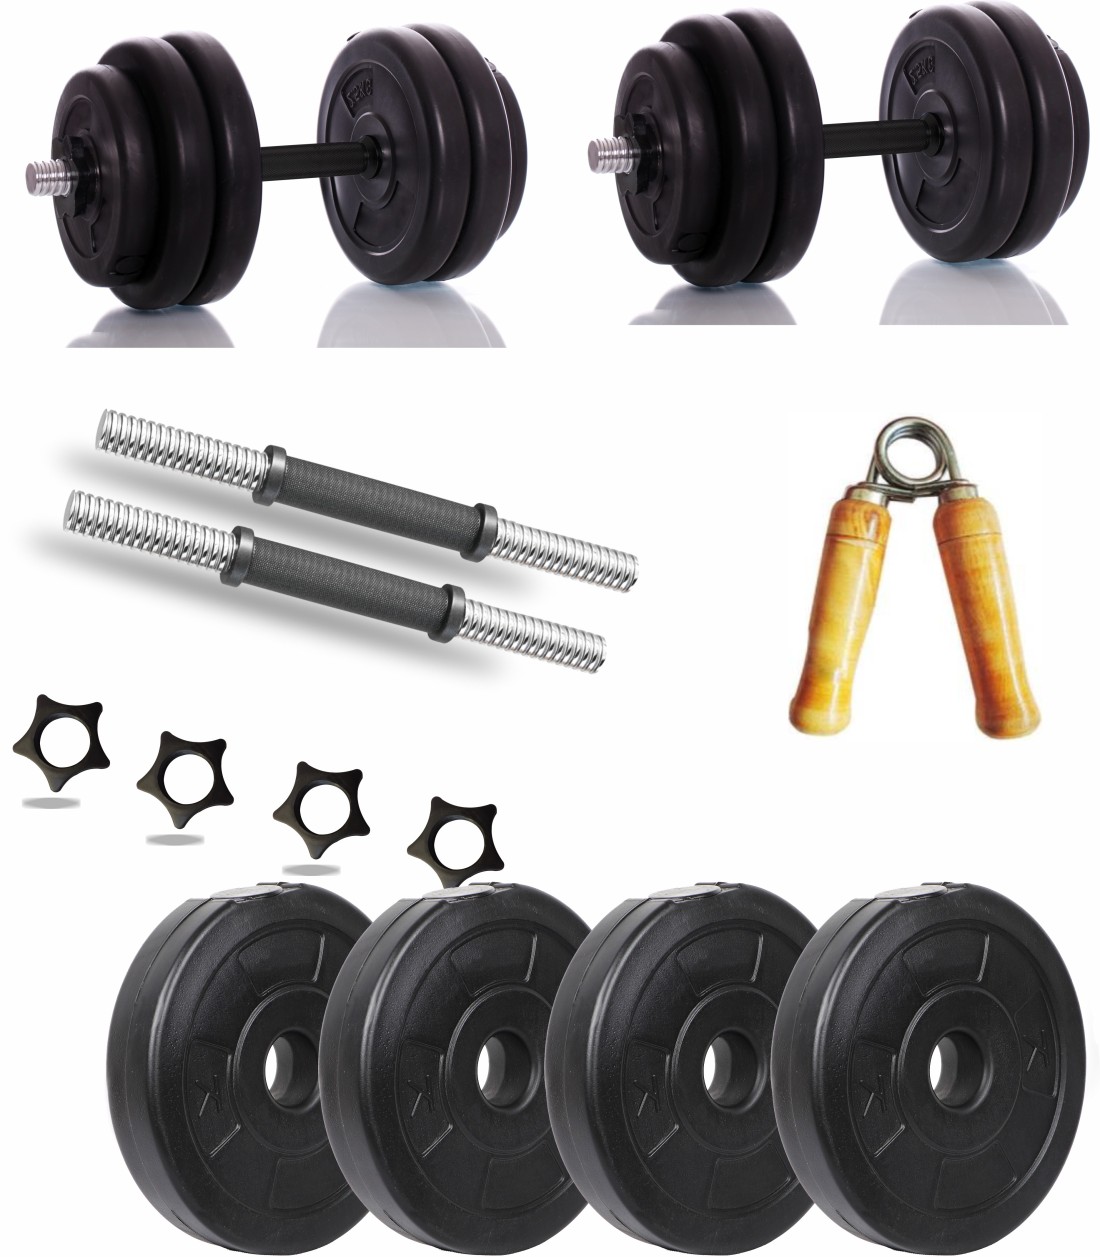 Gym Insane 12 KG home gym combo workout 14 dumbles gym equipment set with  gym accessories Adjustable Dumbbell - Buy Gym Insane 12 KG home gym combo  workout 14 dumbles gym equipment